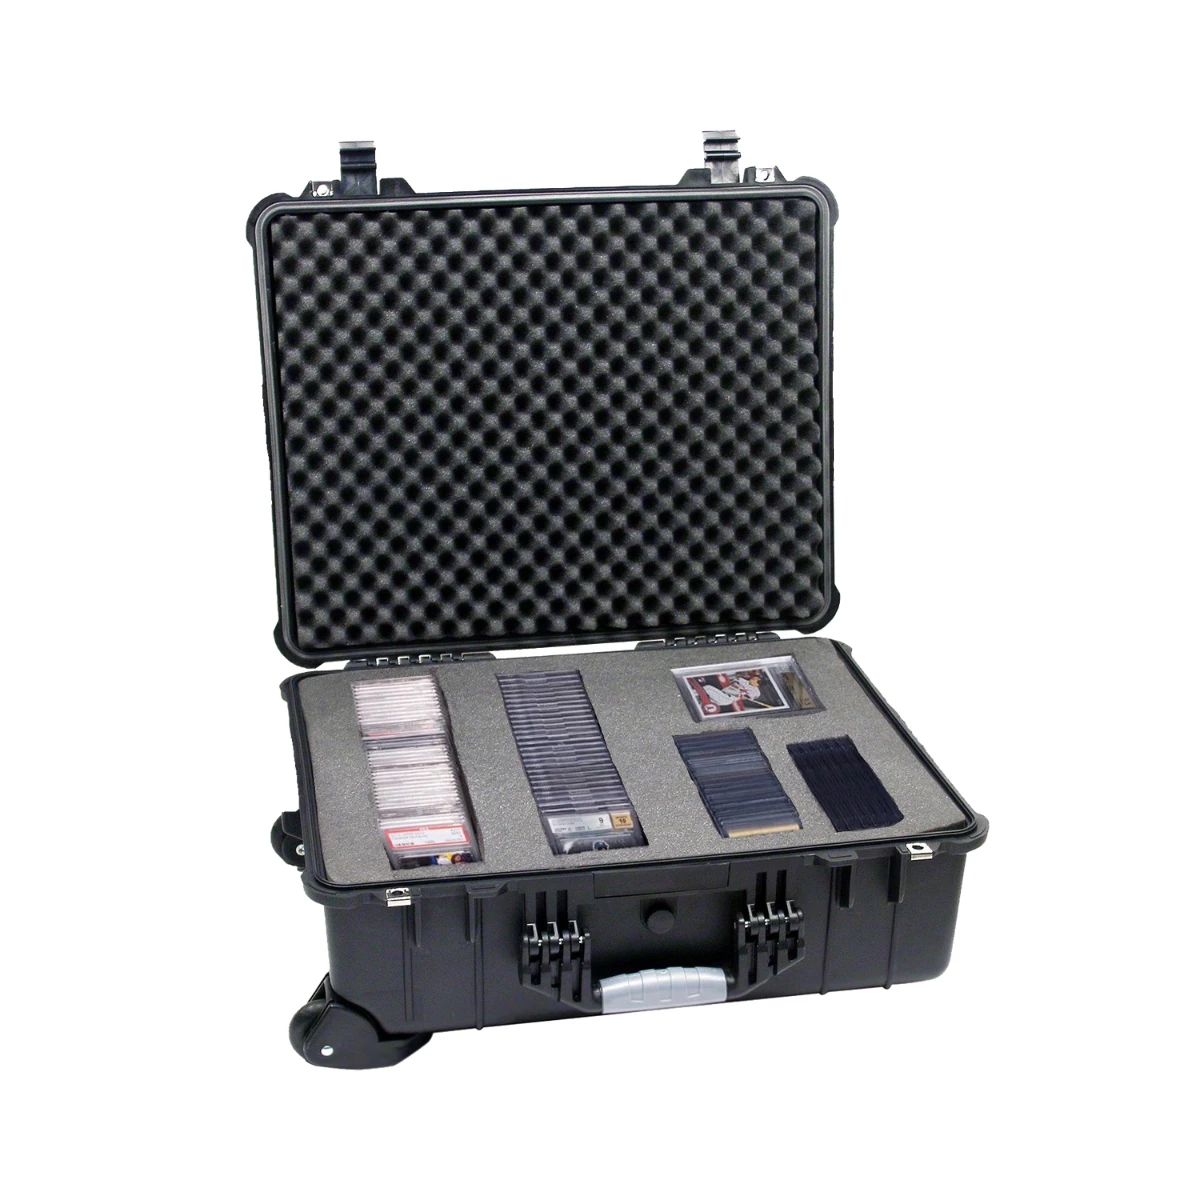 Ningbo Factory Wheeled Graded Card Case - Waterproof Storage Box for PSA BGS SG